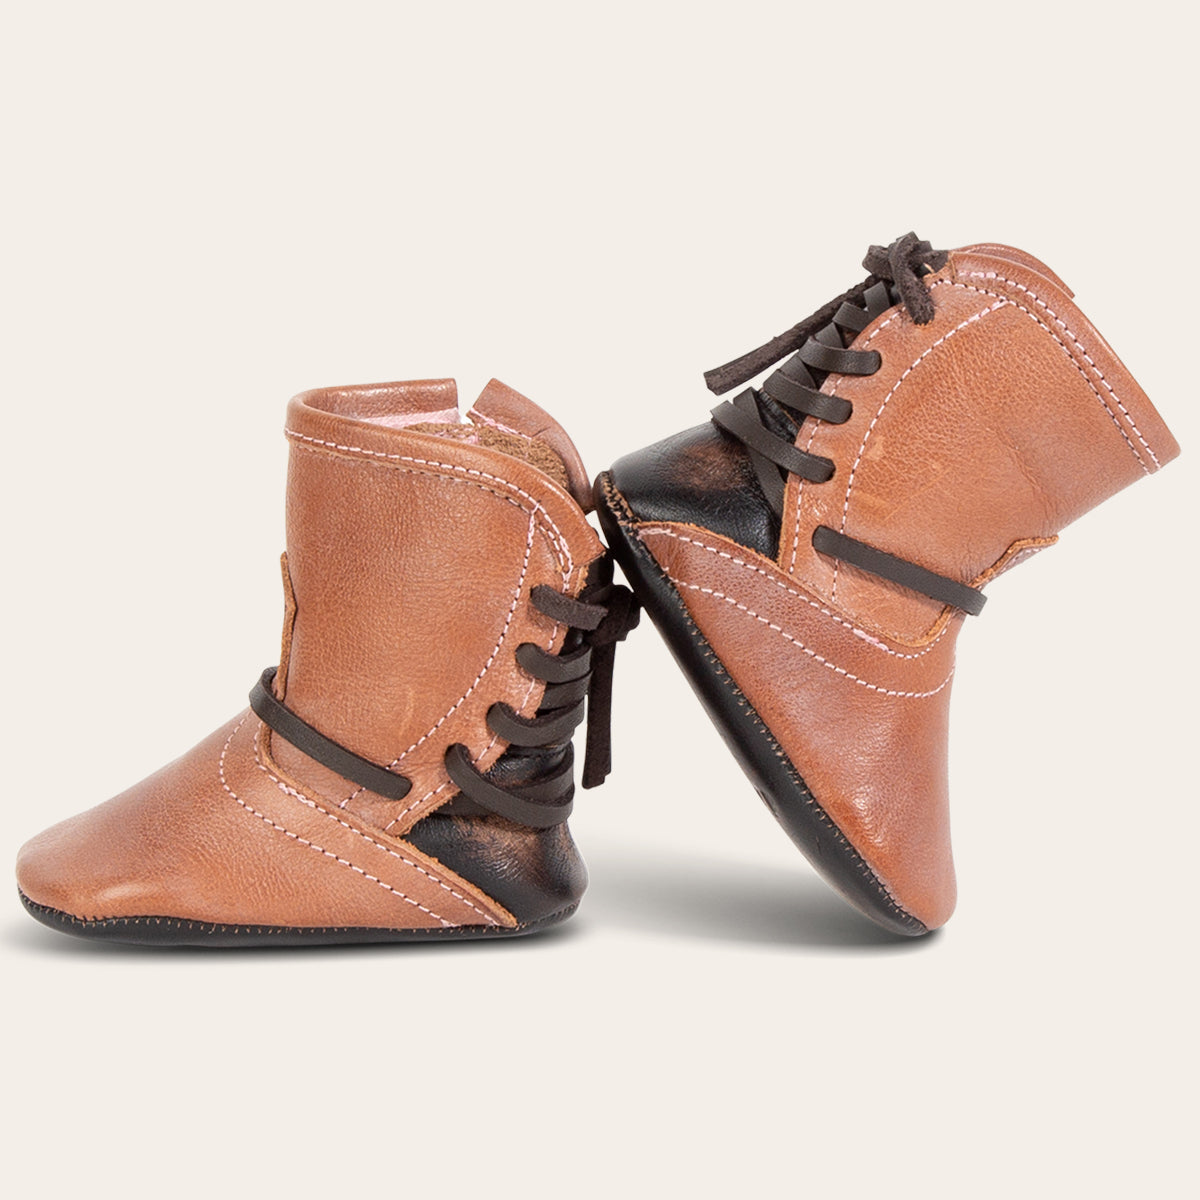 side view showing contrasting back lace detailing on FREEBIRD infant baby coal dusty rose leather bootie